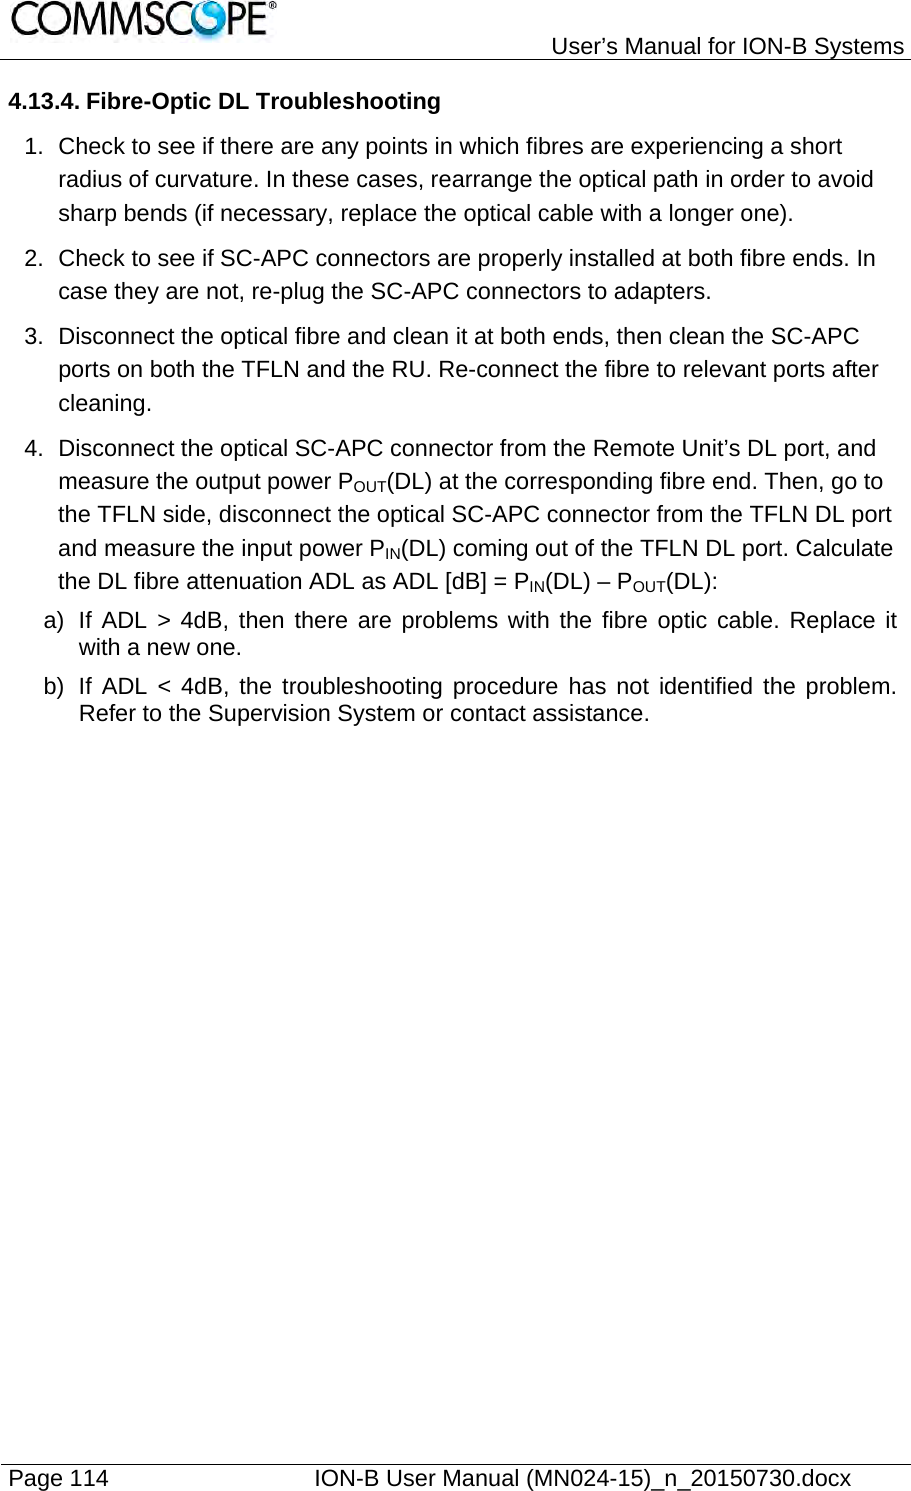   User’s Manual for ION-B Systems Page 114    ION-B User Manual (MN024-15)_n_20150730.docx  4.13.4. Fibre-Optic DL Troubleshooting 1.  Check to see if there are any points in which fibres are experiencing a short radius of curvature. In these cases, rearrange the optical path in order to avoid sharp bends (if necessary, replace the optical cable with a longer one).  2.  Check to see if SC-APC connectors are properly installed at both fibre ends. In case they are not, re-plug the SC-APC connectors to adapters.  3.  Disconnect the optical fibre and clean it at both ends, then clean the SC-APC ports on both the TFLN and the RU. Re-connect the fibre to relevant ports after cleaning. 4.  Disconnect the optical SC-APC connector from the Remote Unit’s DL port, and measure the output power POUT(DL) at the corresponding fibre end. Then, go to the TFLN side, disconnect the optical SC-APC connector from the TFLN DL port and measure the input power PIN(DL) coming out of the TFLN DL port. Calculate the DL fibre attenuation ADL as ADL [dB] = PIN(DL) – POUT(DL): a)  If ADL &gt; 4dB, then there are problems with the fibre optic cable. Replace it with a new one. b)  If ADL &lt; 4dB, the troubleshooting procedure has not identified the problem. Refer to the Supervision System or contact assistance.    